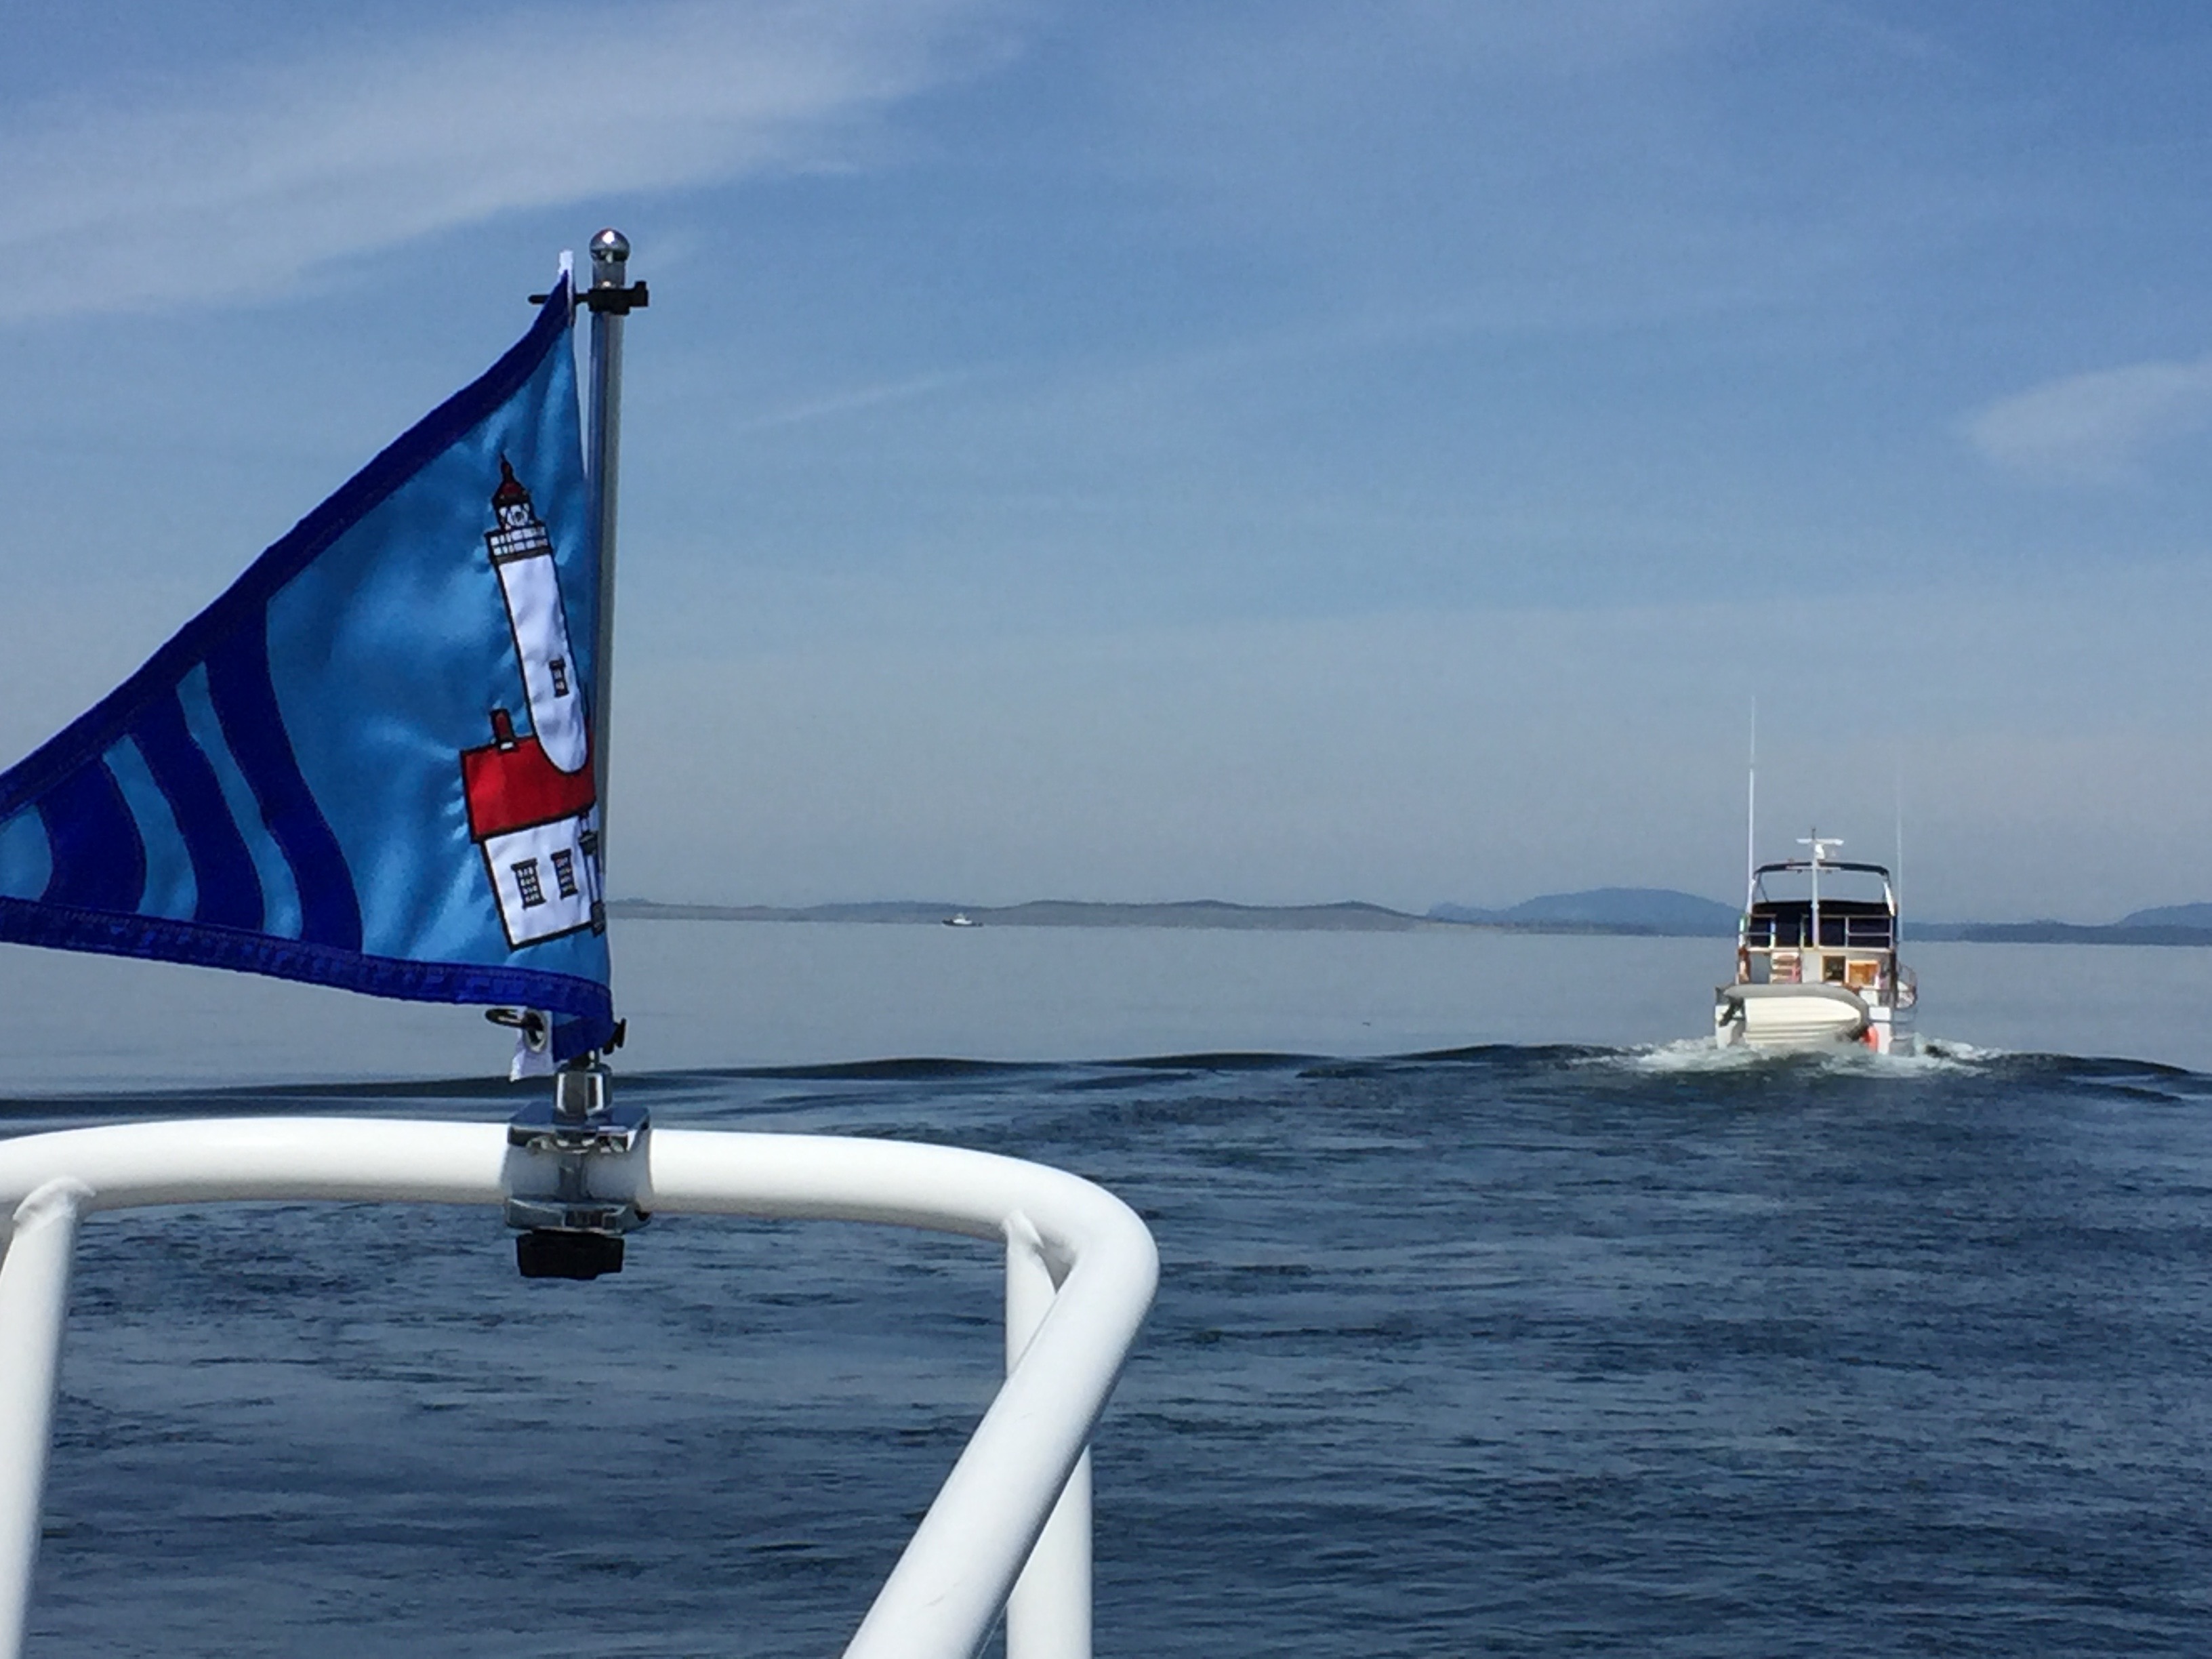 flying the North Olympic Sail & Power Squadron Burgee